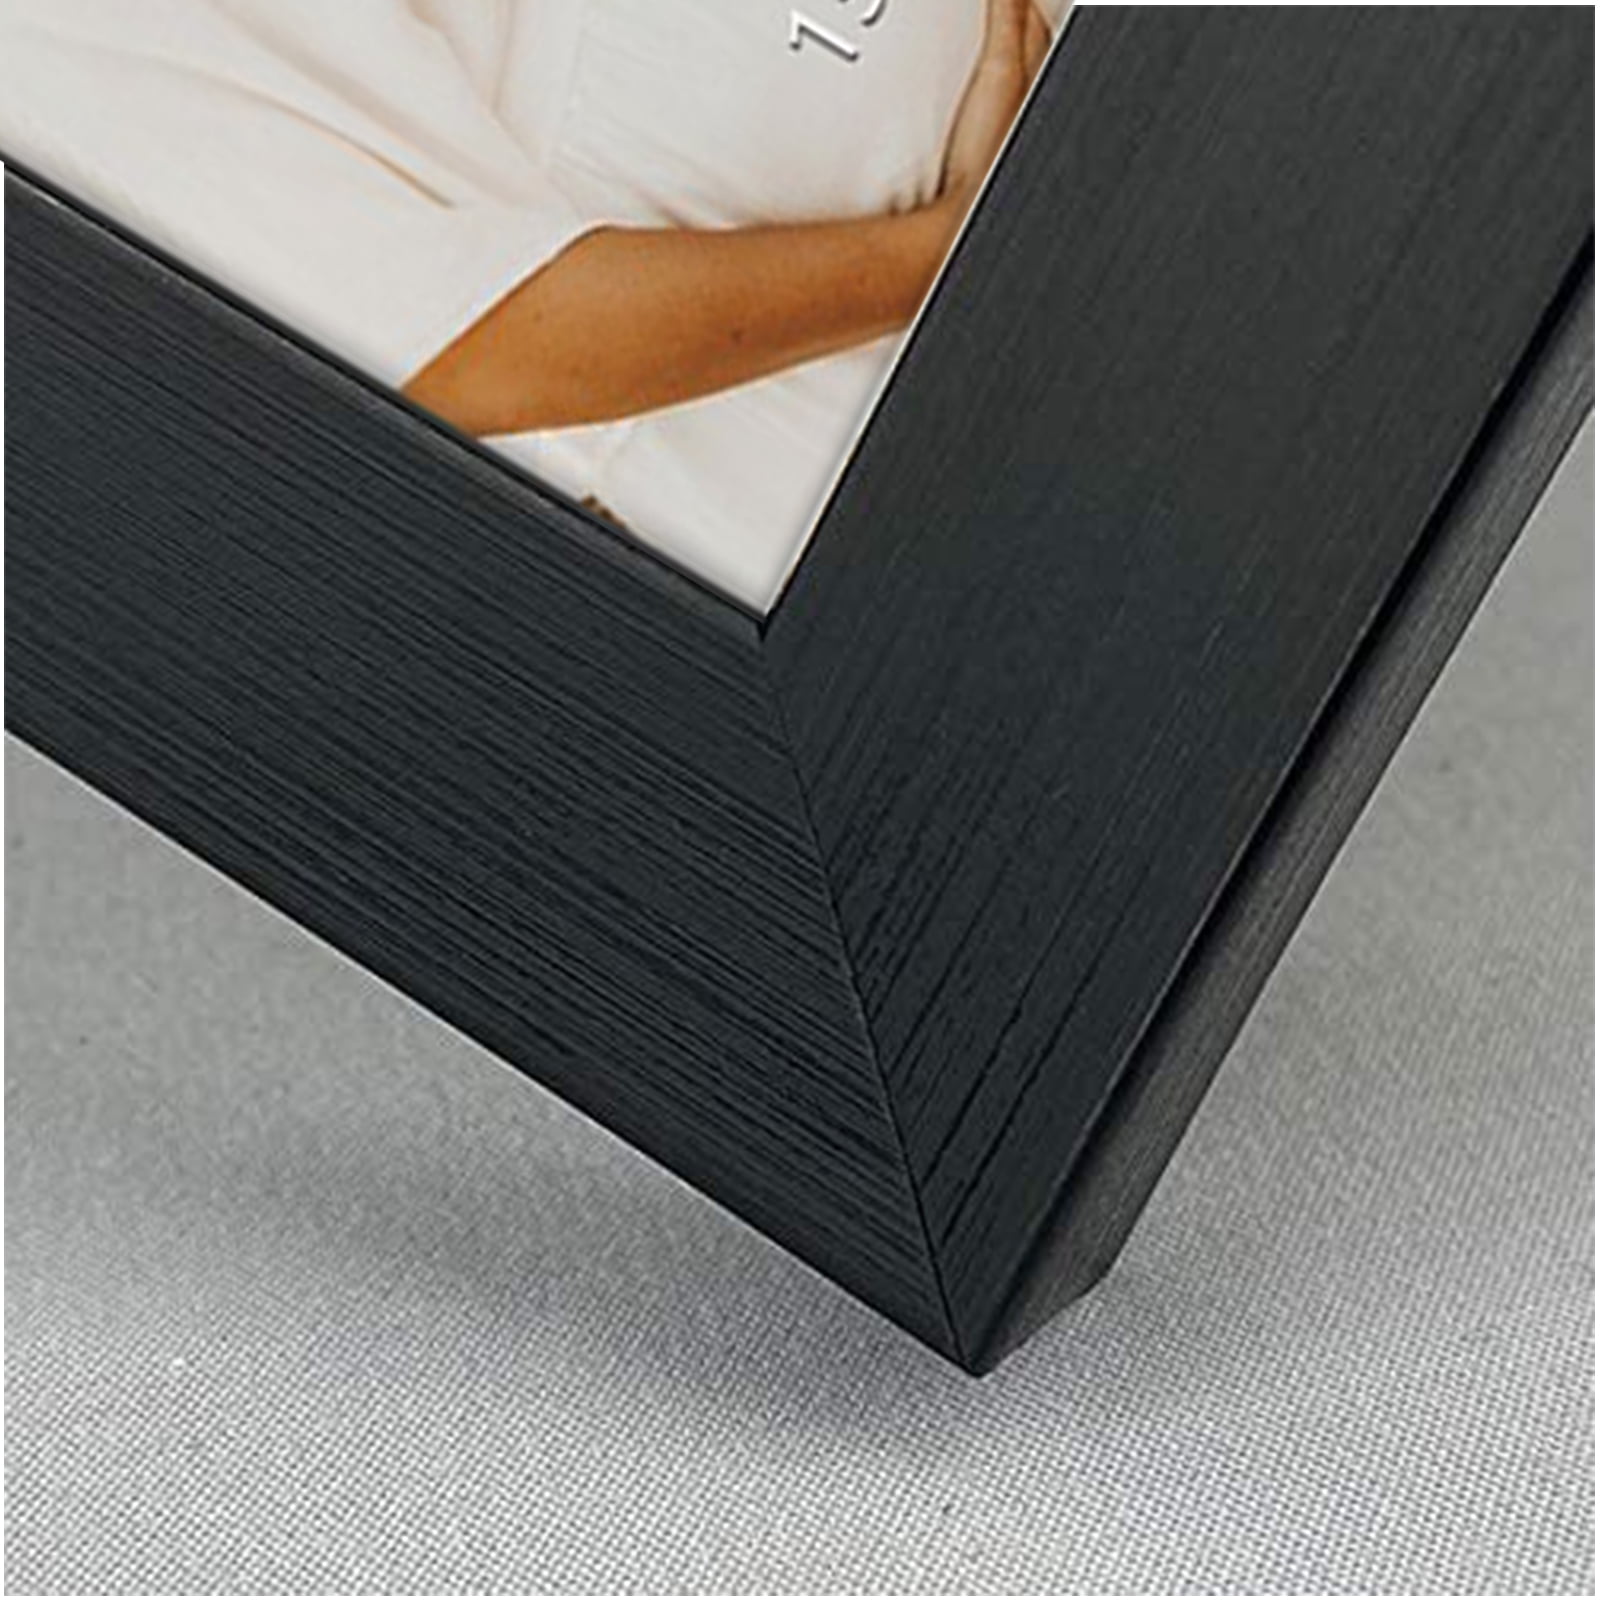 Spepla 4x6 Picture Frame Matted to 4x6 Photo or 5x7 without Mat, 4 Pack  Wooden Frames 4x6 Black for Wall or Tabletop Display